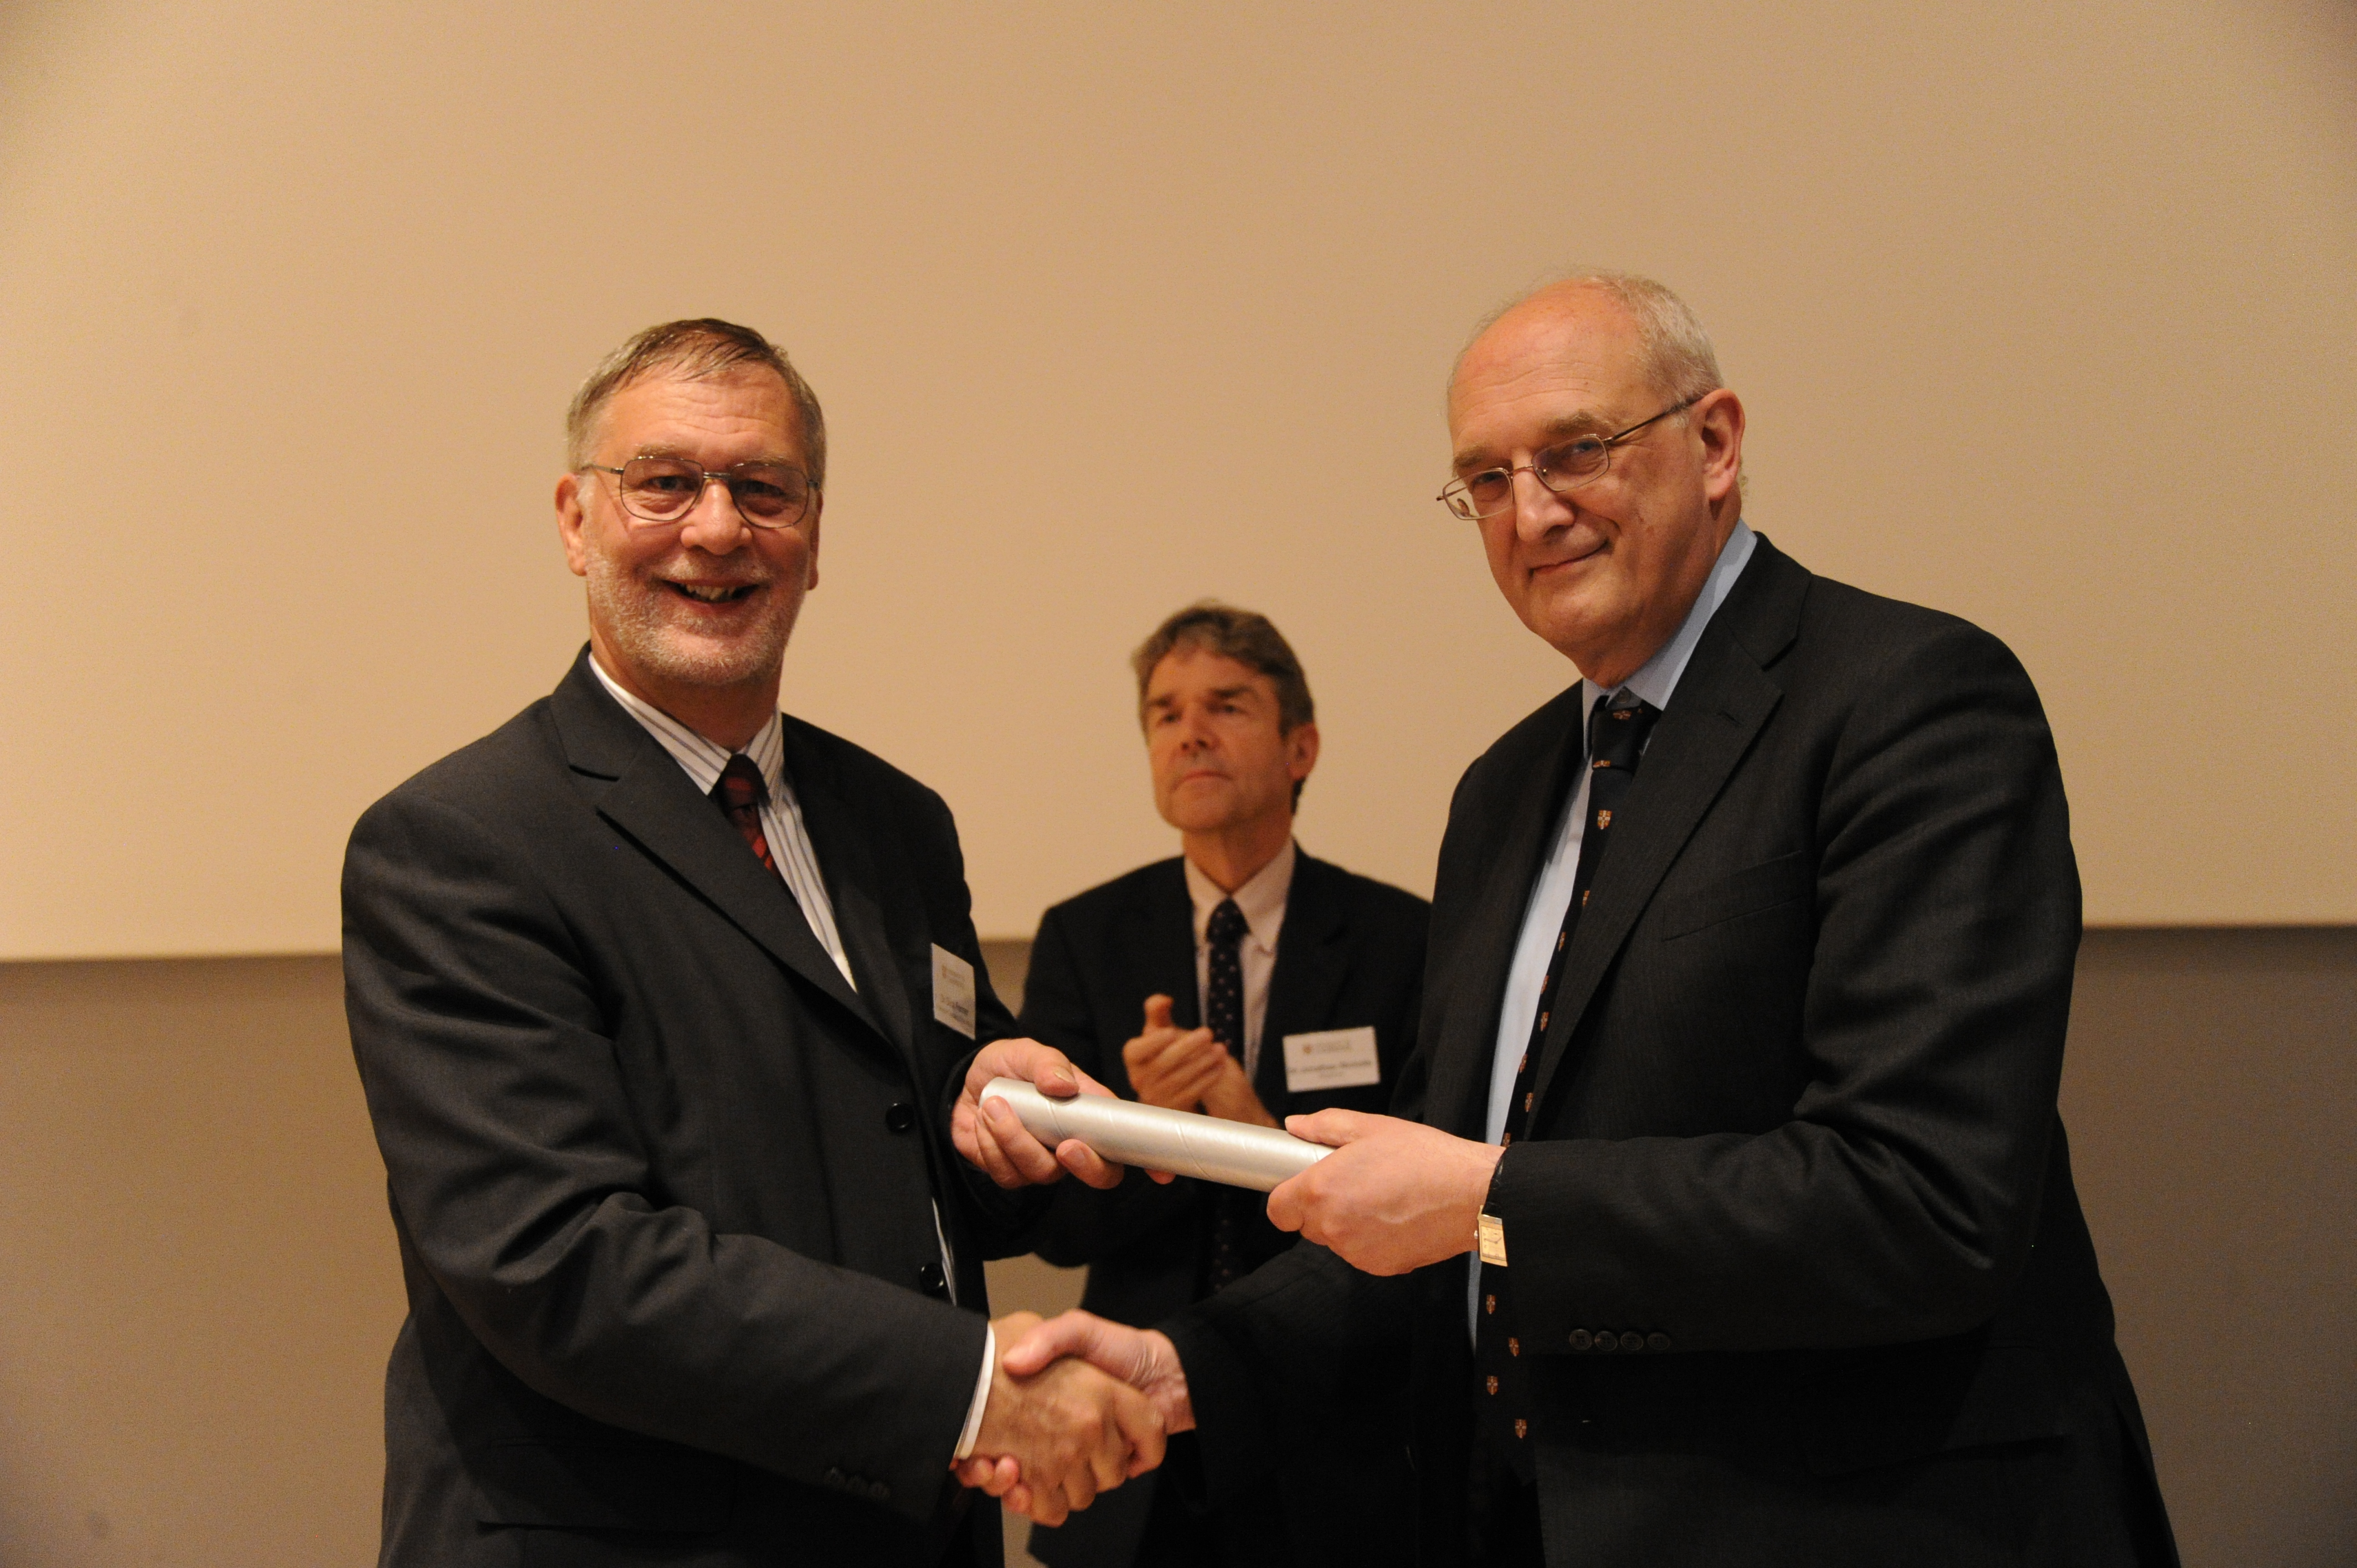 Dr Dick Fenner wins Pilkington Prize 2013 for excellence in teaching